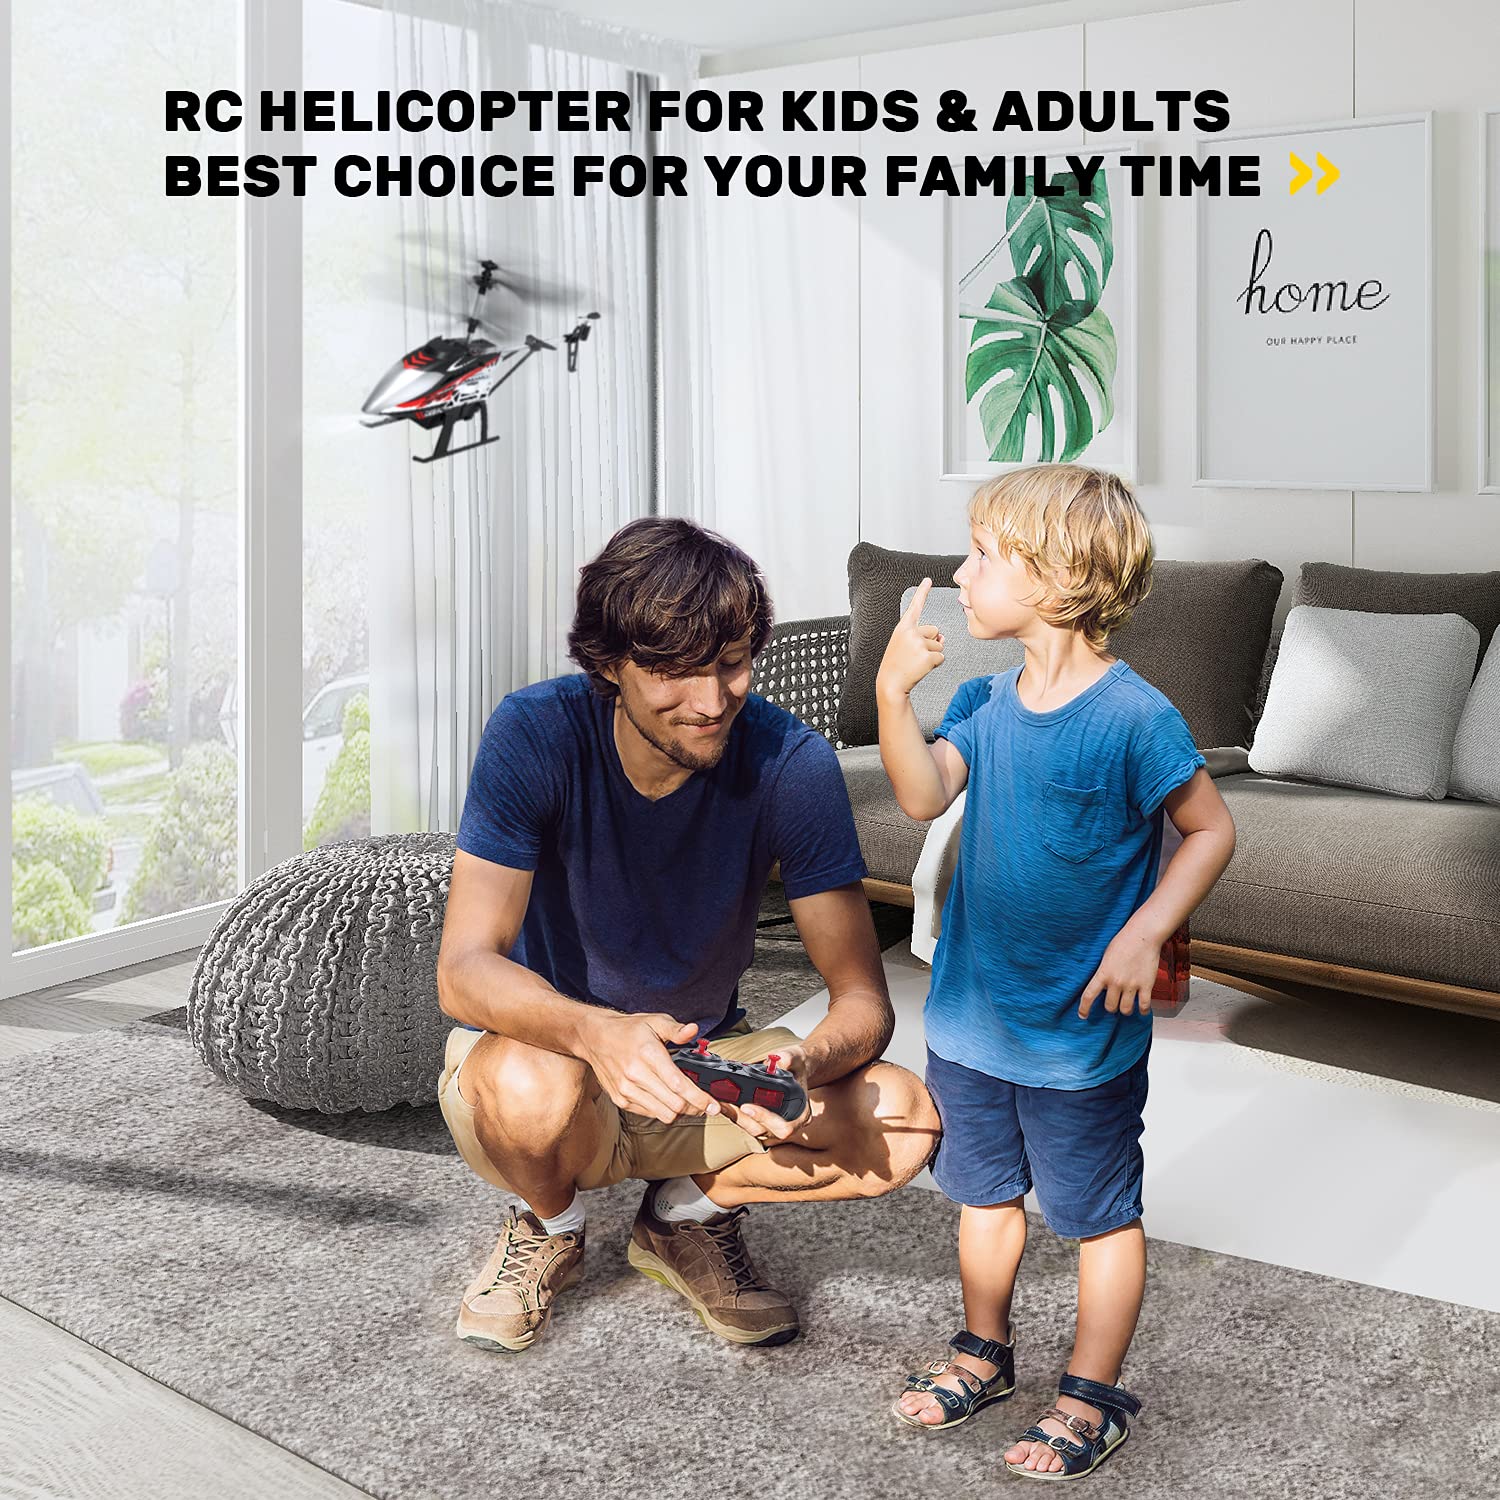 DEERC DE52 Remote Control Helicopter,Altitude Hold RC Helicopters with Storage Case Extra Shell,2.4GHz Aircraft Indoor Flying Toy with High&Low Speed Mode,2 Modular Battery for 24 Min Play Boys Girls